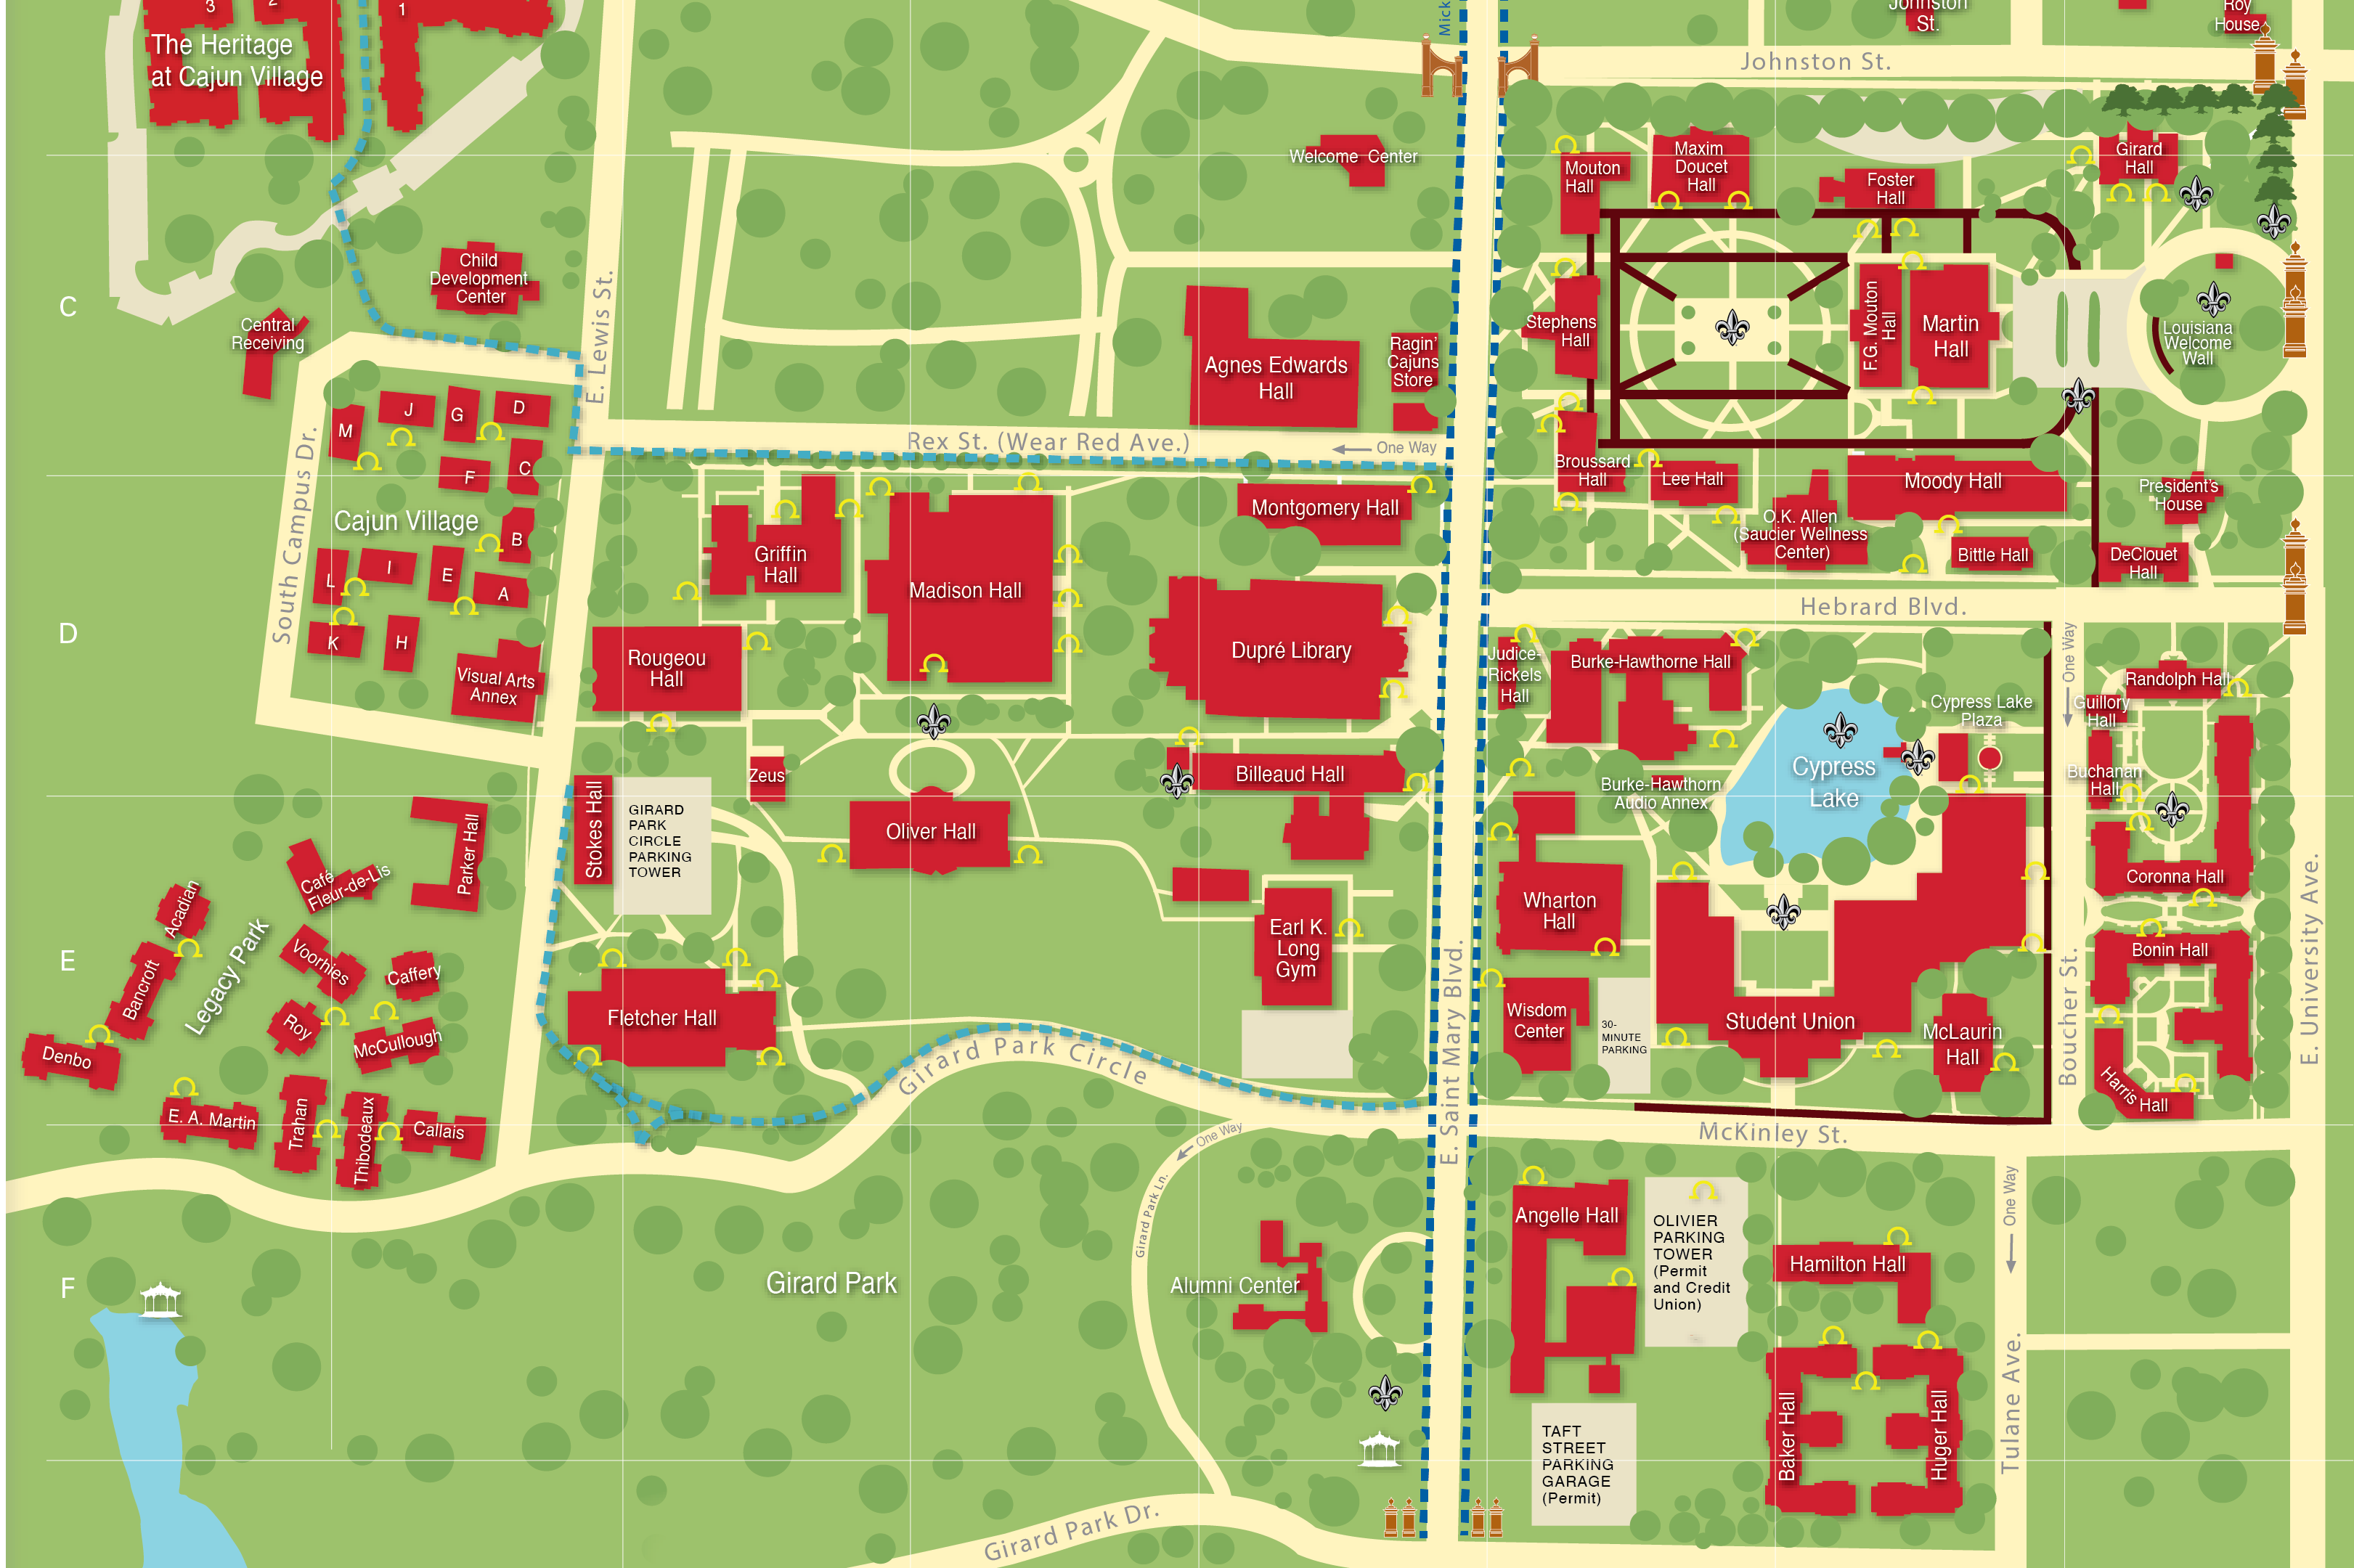 A screenshot of the printed campus map 